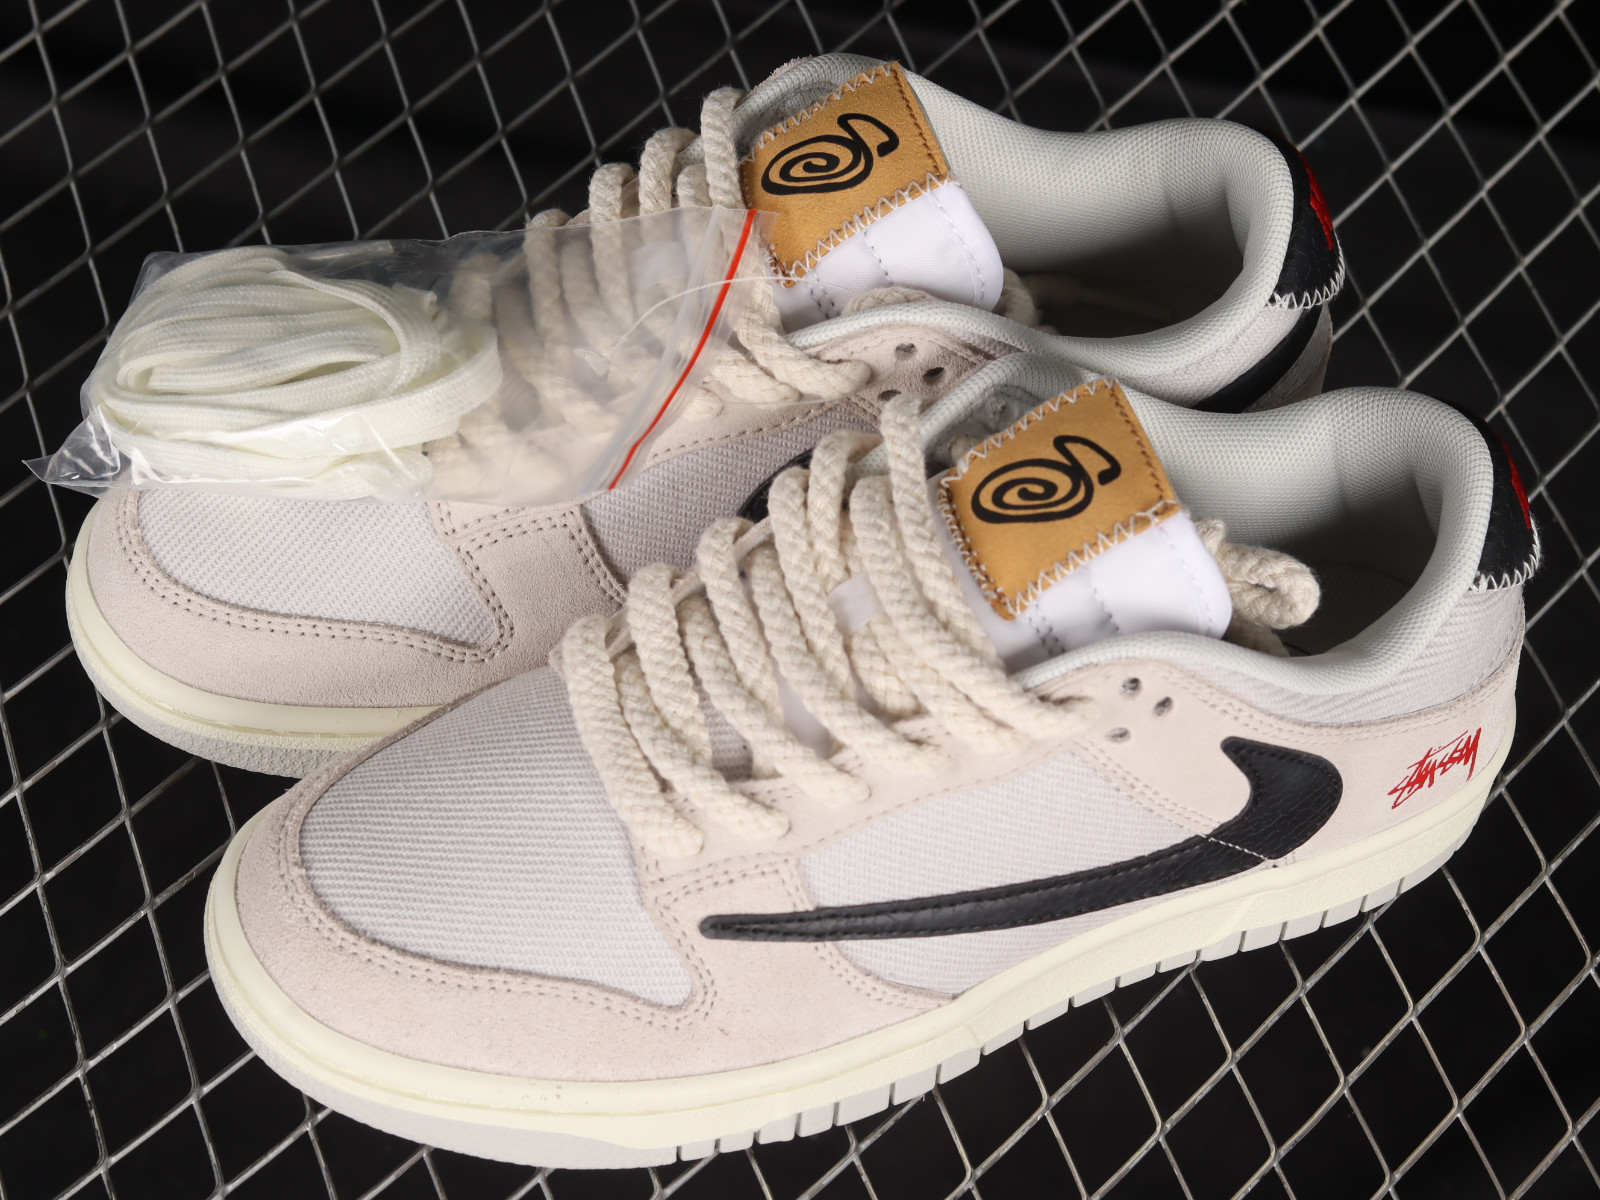 StclaircomoShops - Stussy x Nike SB Dunk Low Certified White Black Red DD9776 - force 1 pioneer leather options - 068